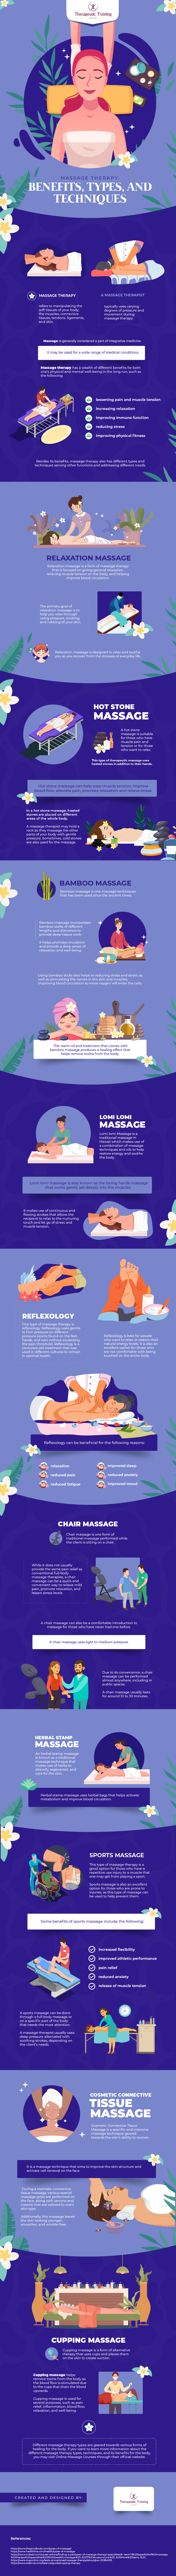 massage_theraphy_benefits_infographic